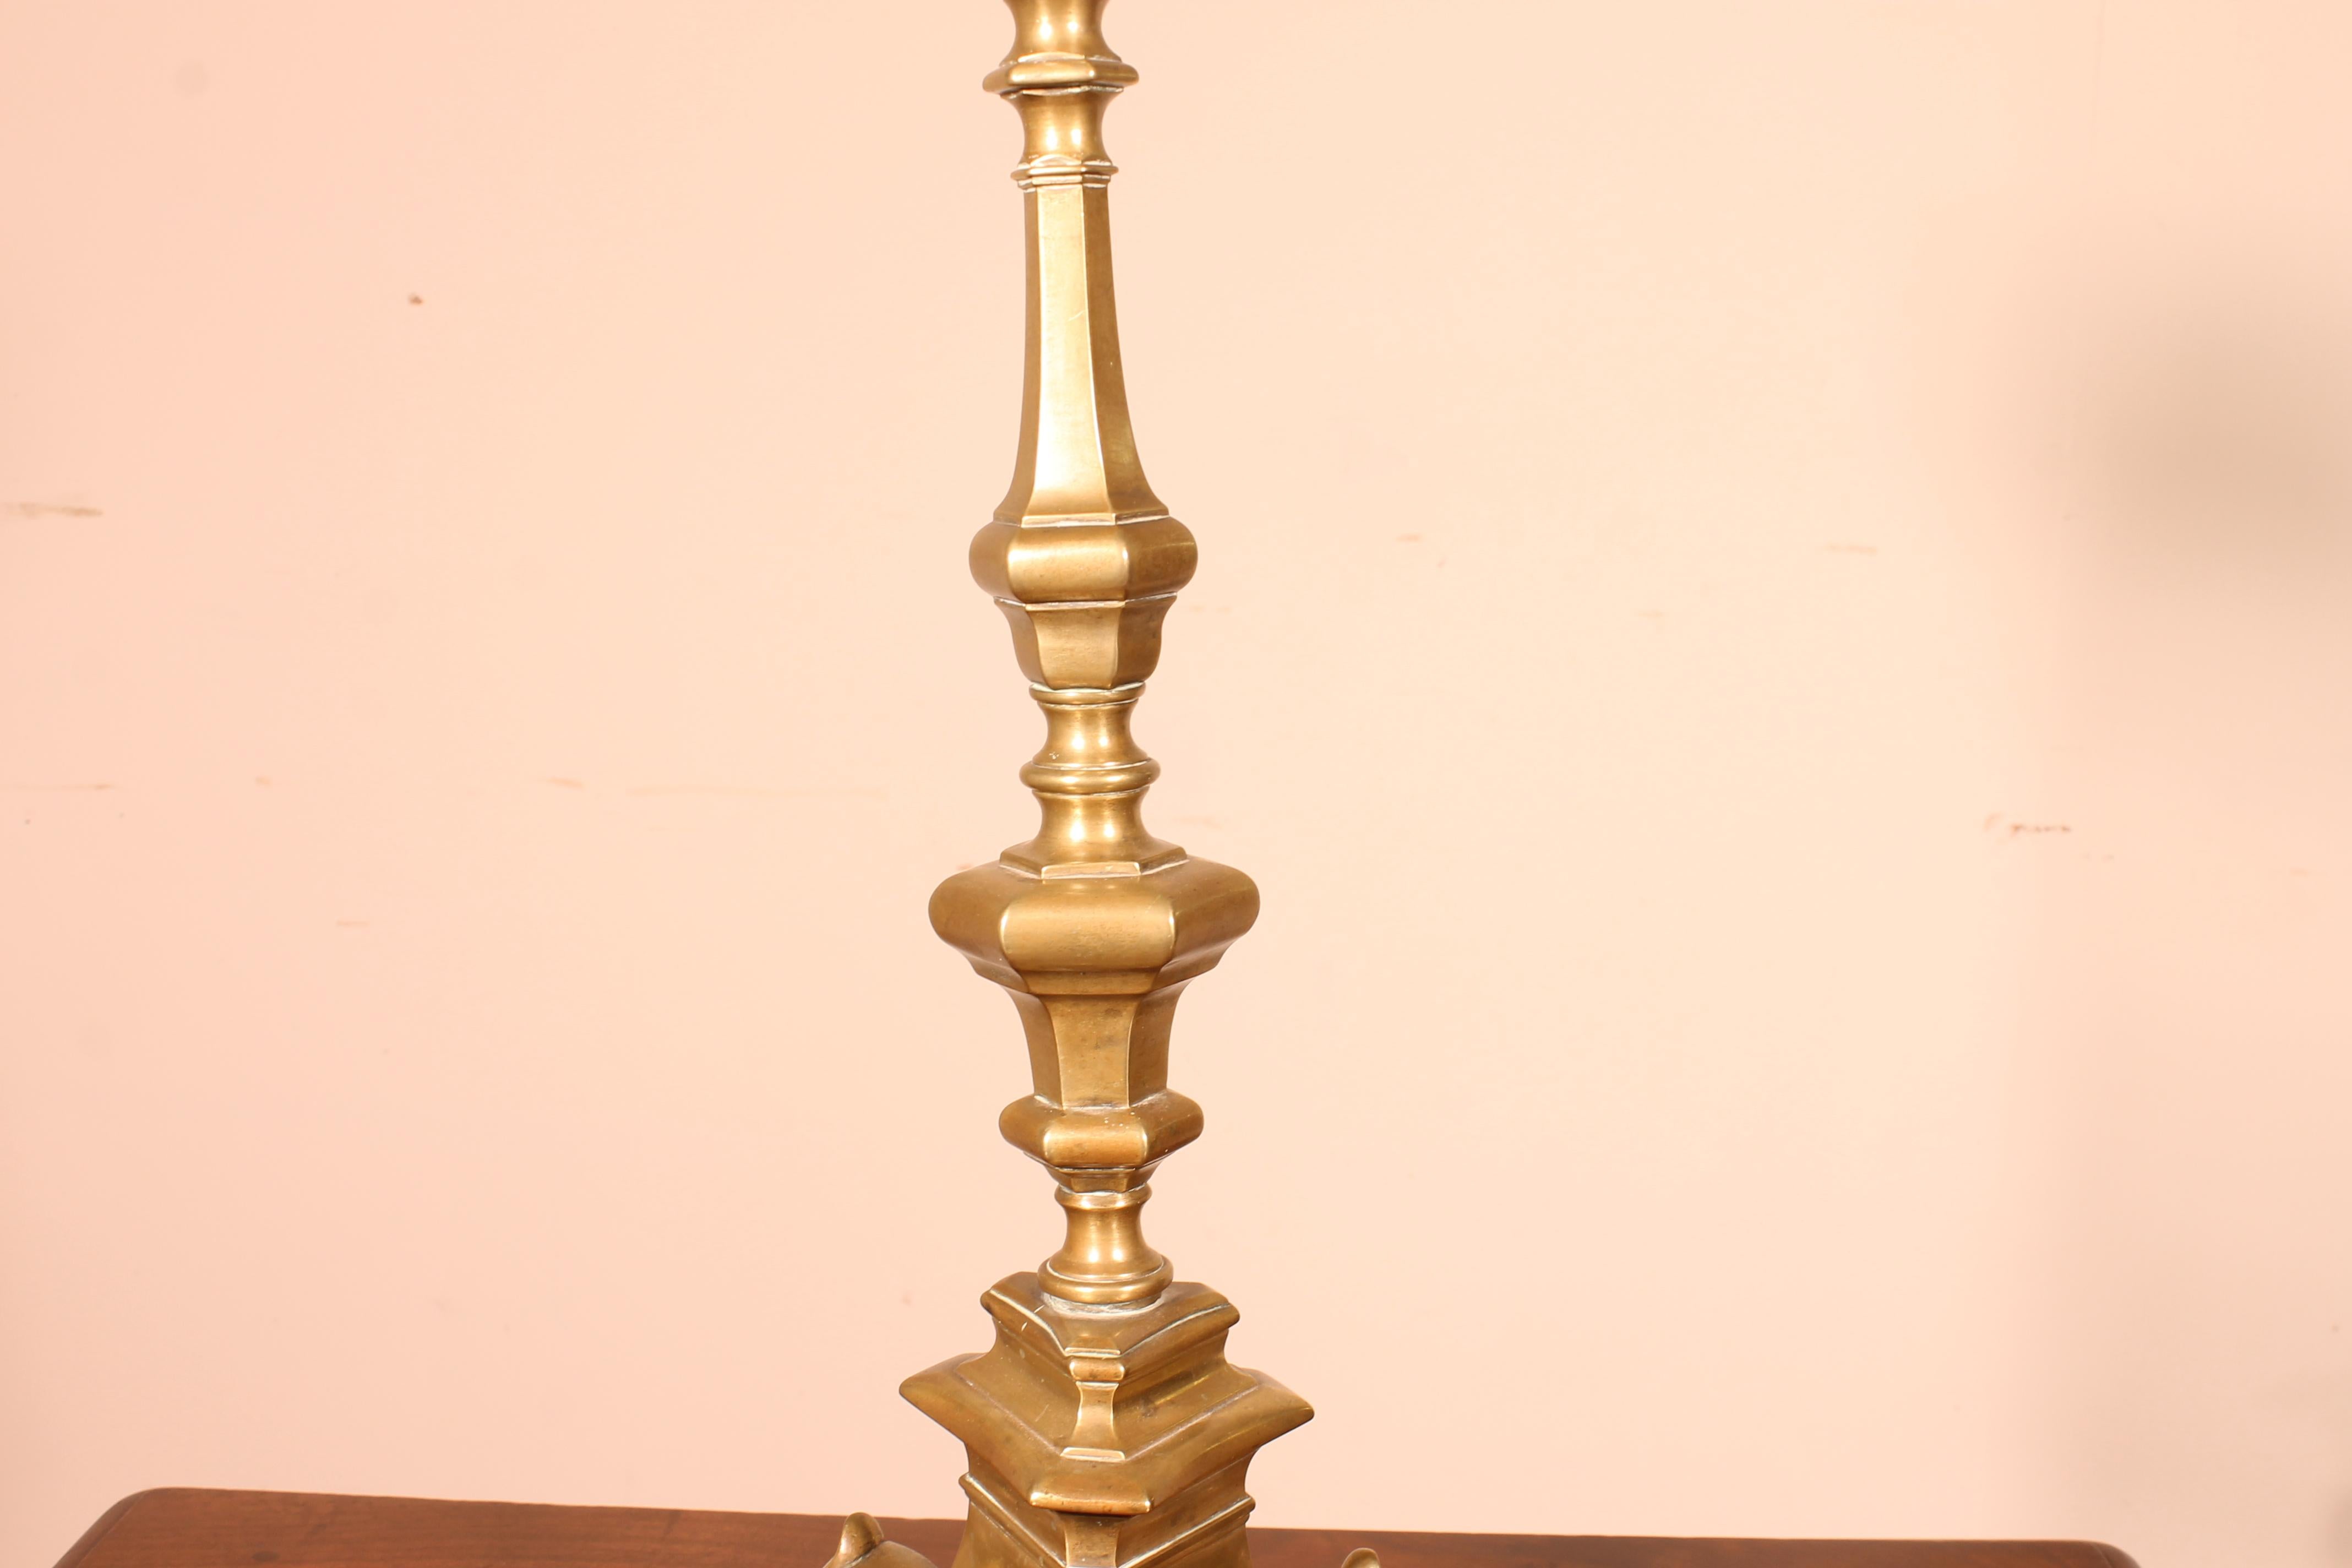 Renaissance Big 17th Century Candlestick of Italy in Bronze